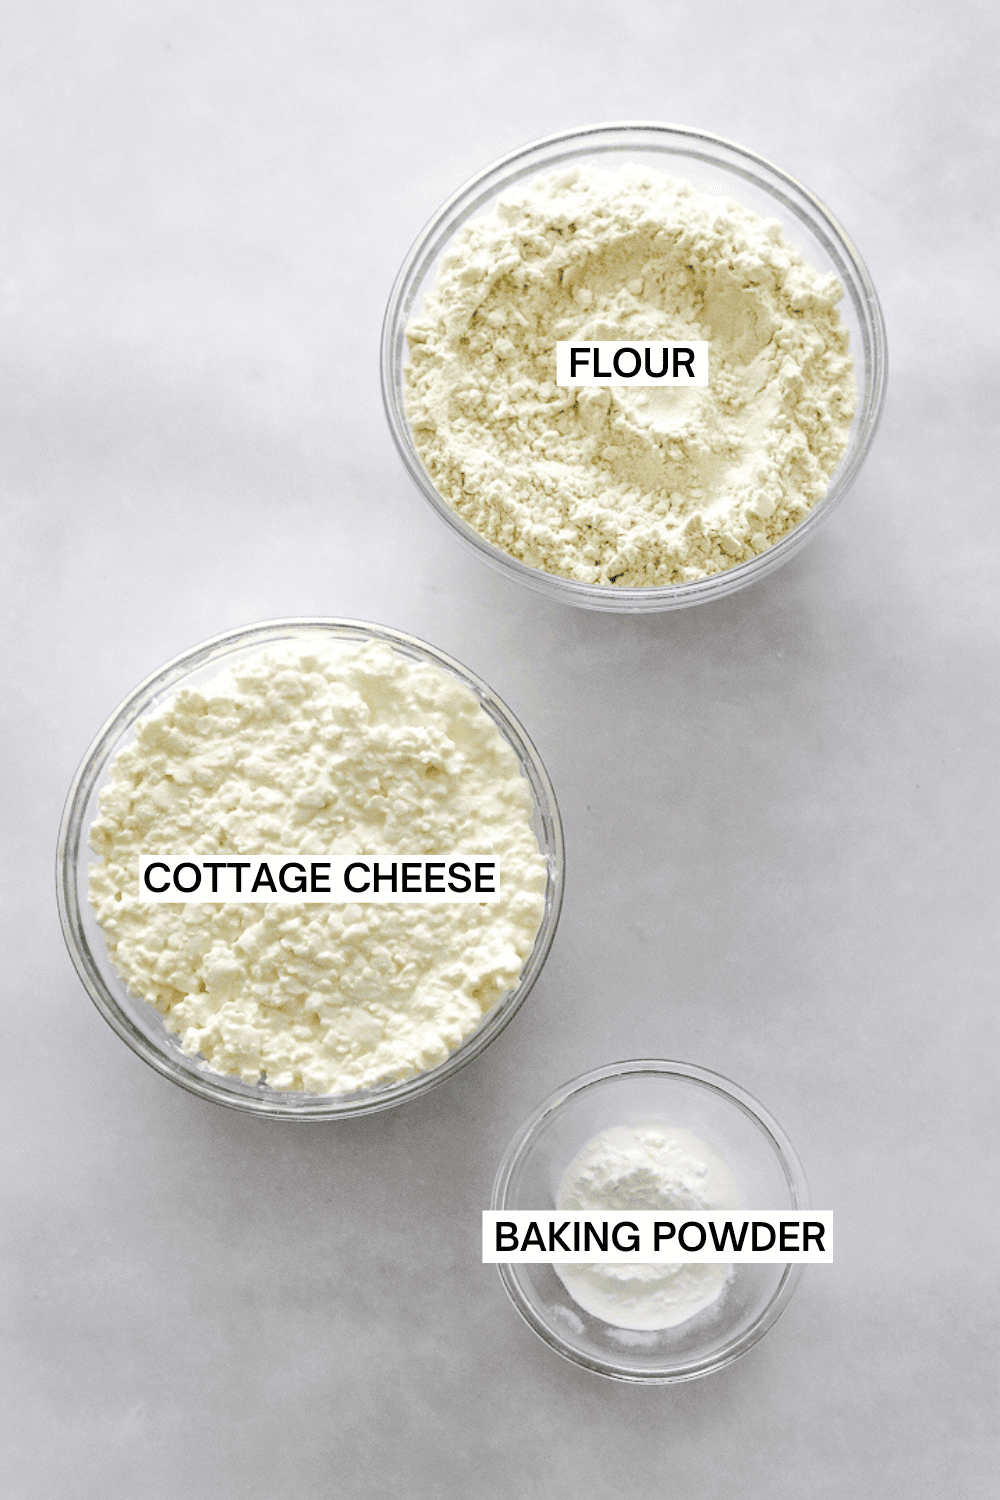 Flour, cottage cheese and baking powder in separate bowls with labels over each of them.